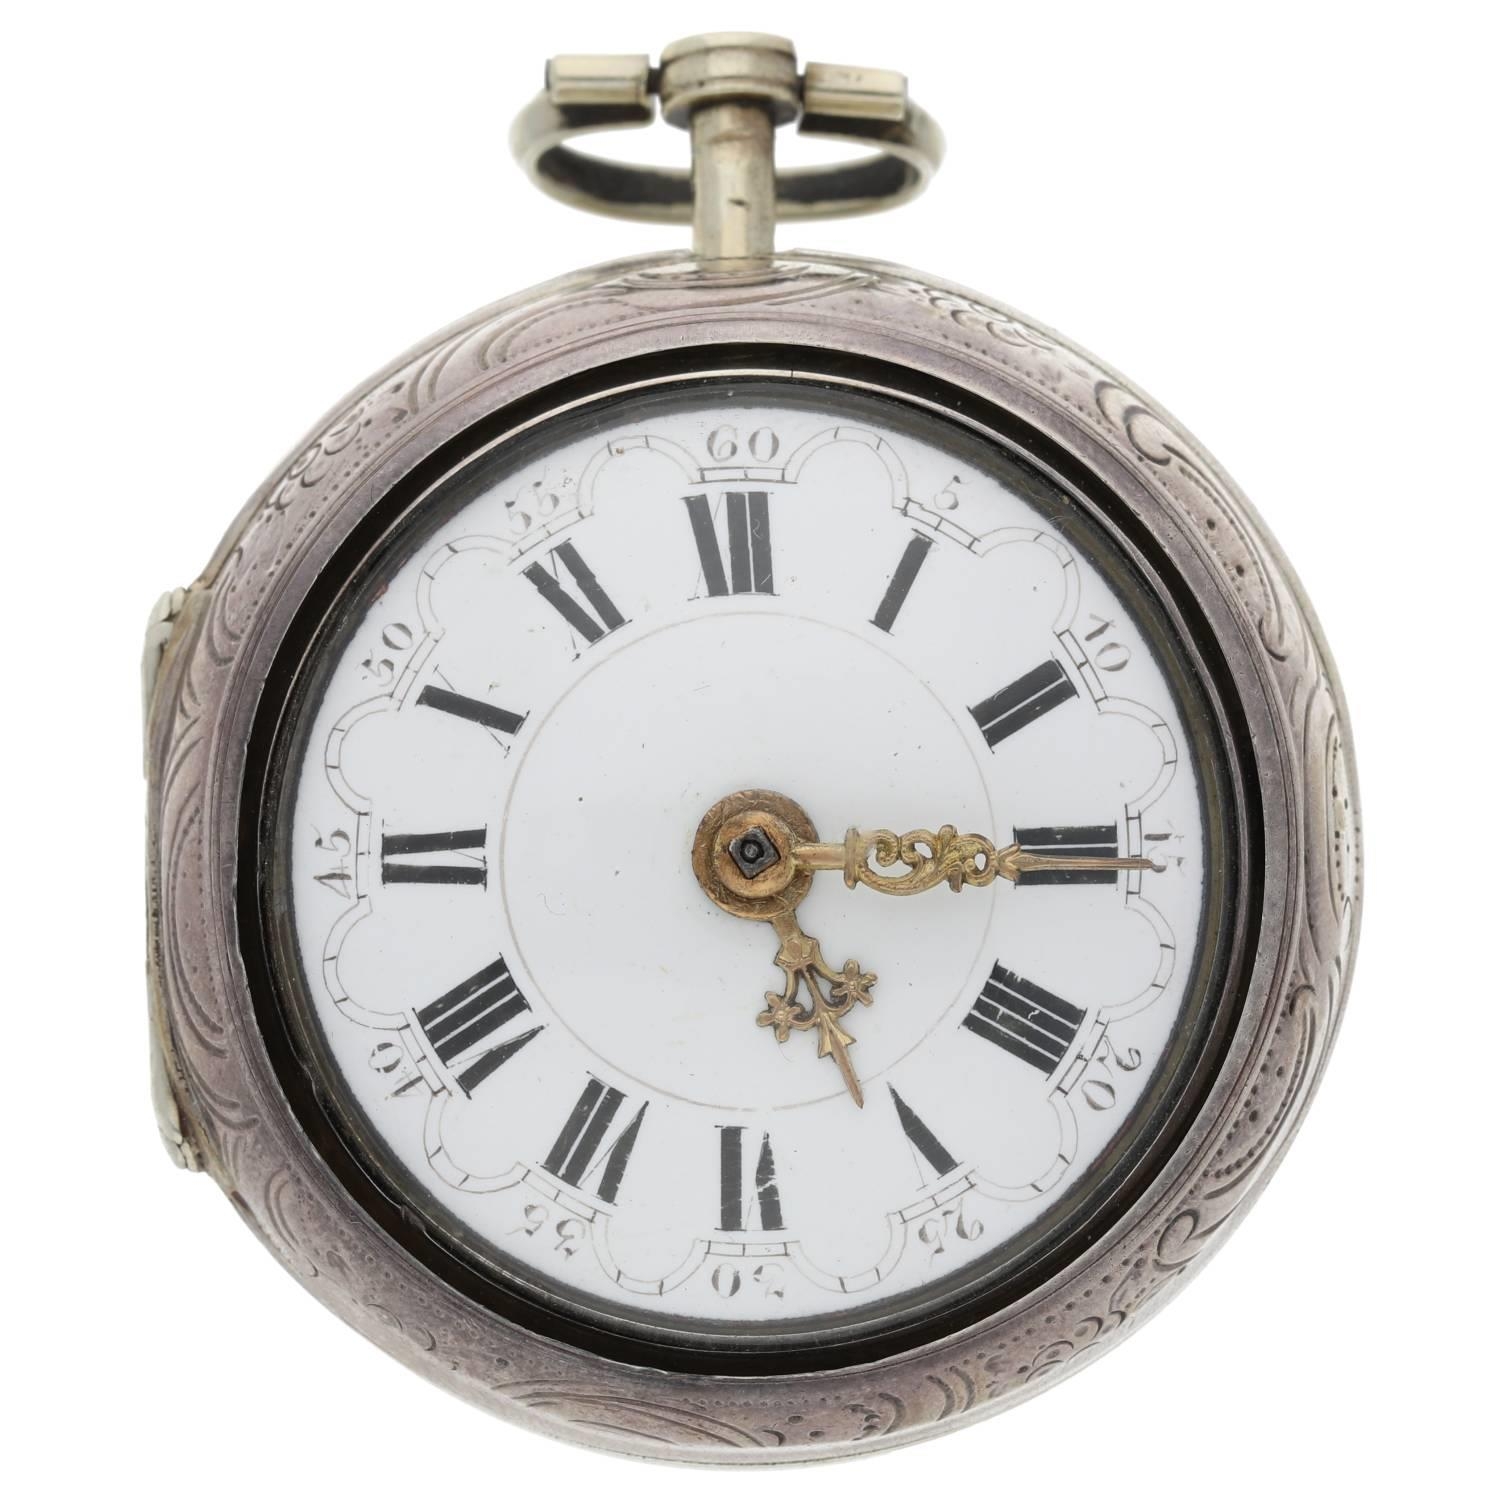 Samson, London - George III English silver repoussé pair cased verge pocket watch, London 1806, - Image 2 of 9